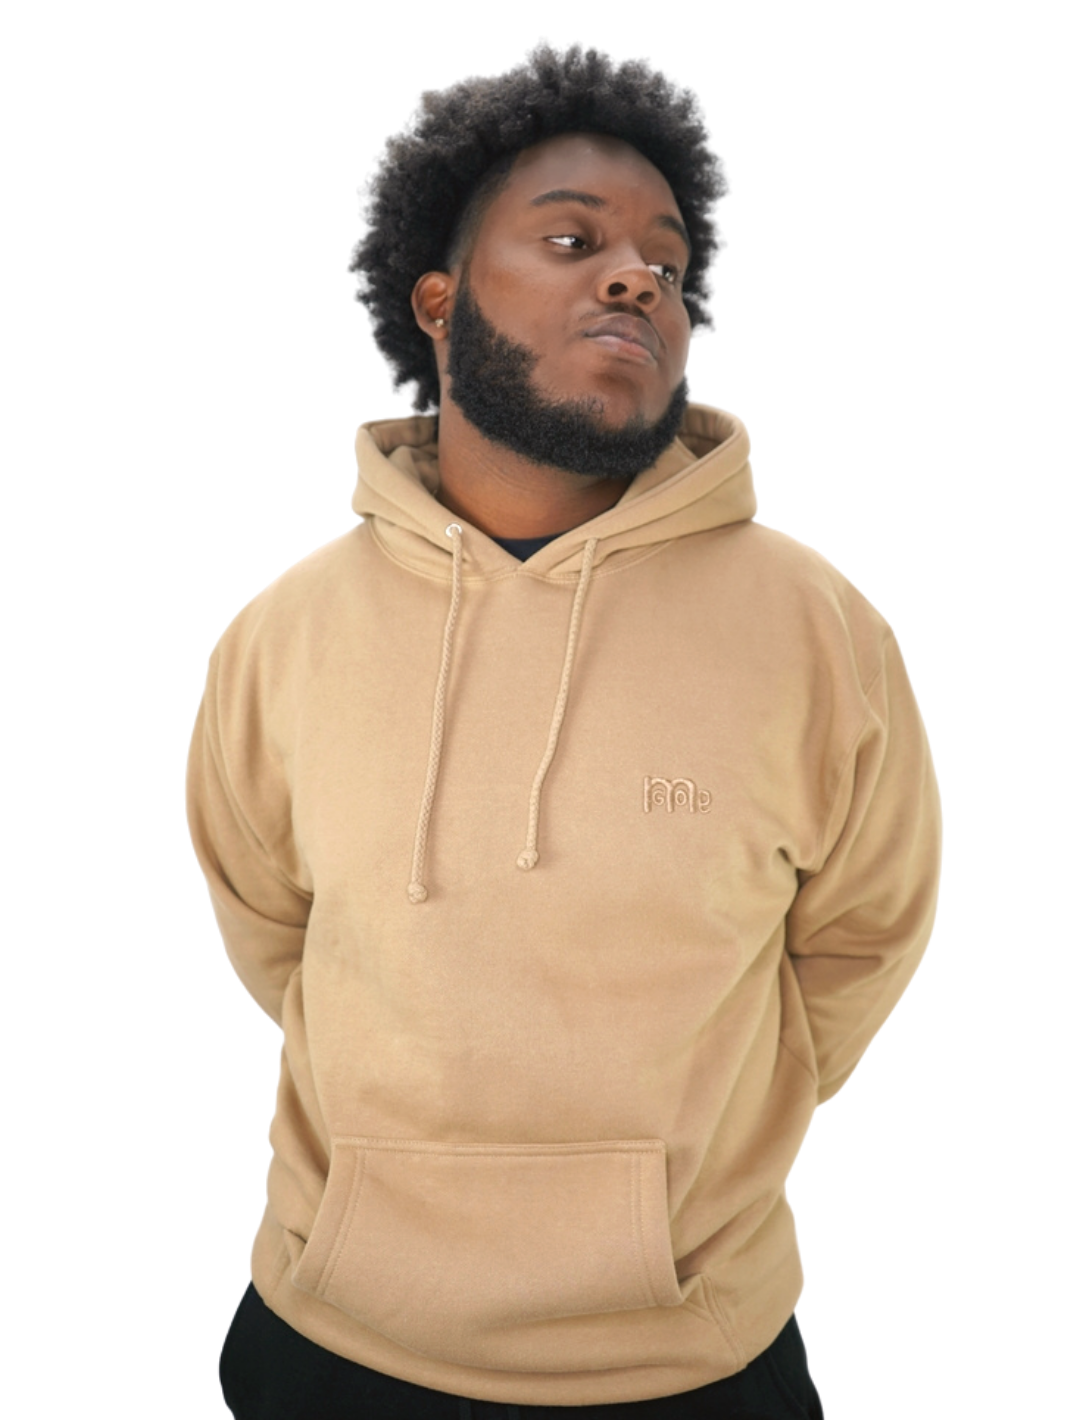 Sandstone Pullover Hoodie with tone on tone embroidered GODinme logo at left chest